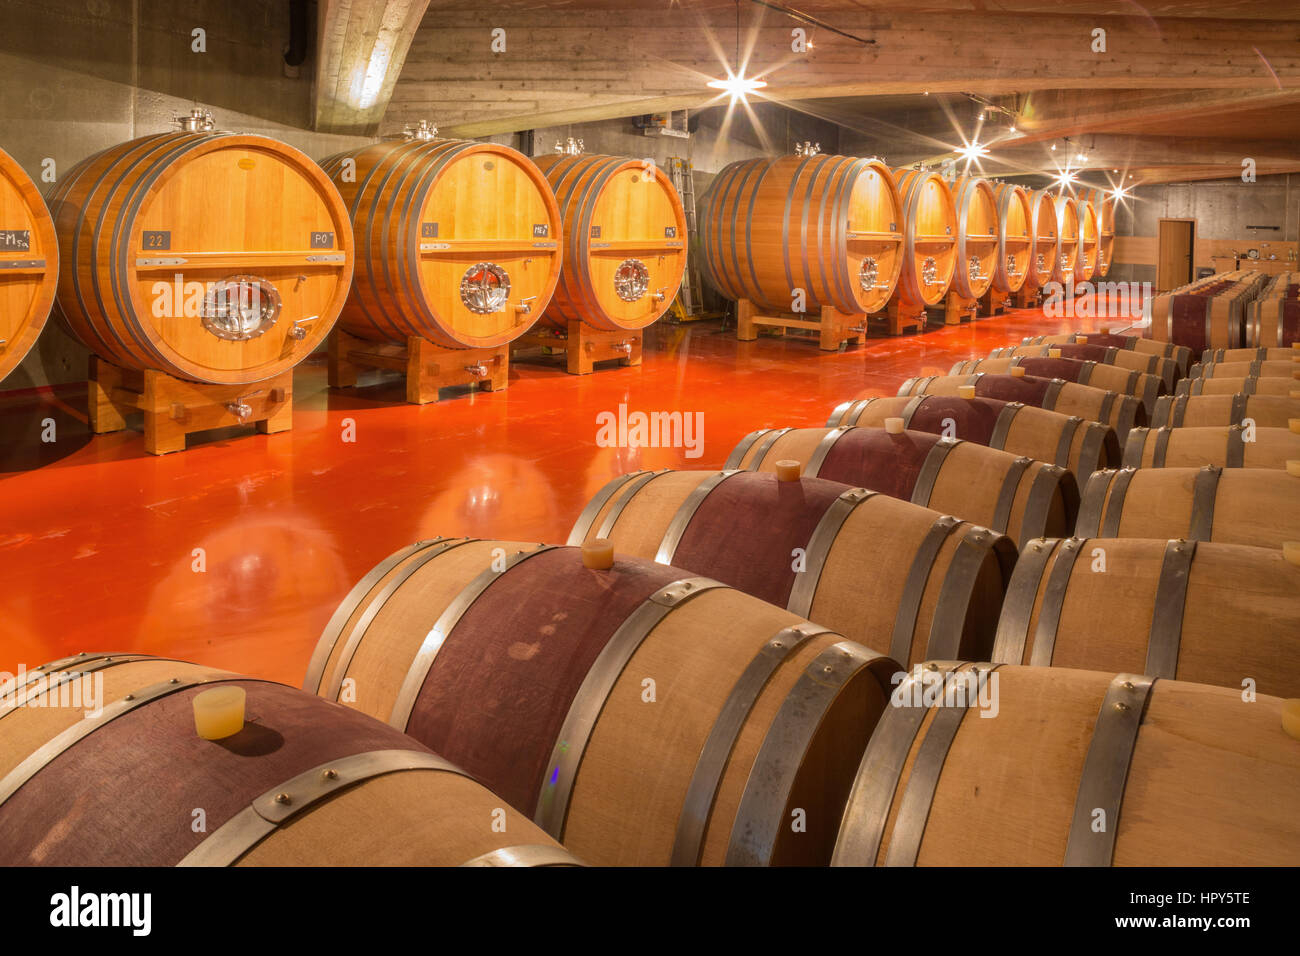 TRNAVA, SLOVAKIA - MARCH 3, 2014: Casks from indoor of modern wine cellar of great Slovak producer 'Mrva and Stanko'. Stock Photo